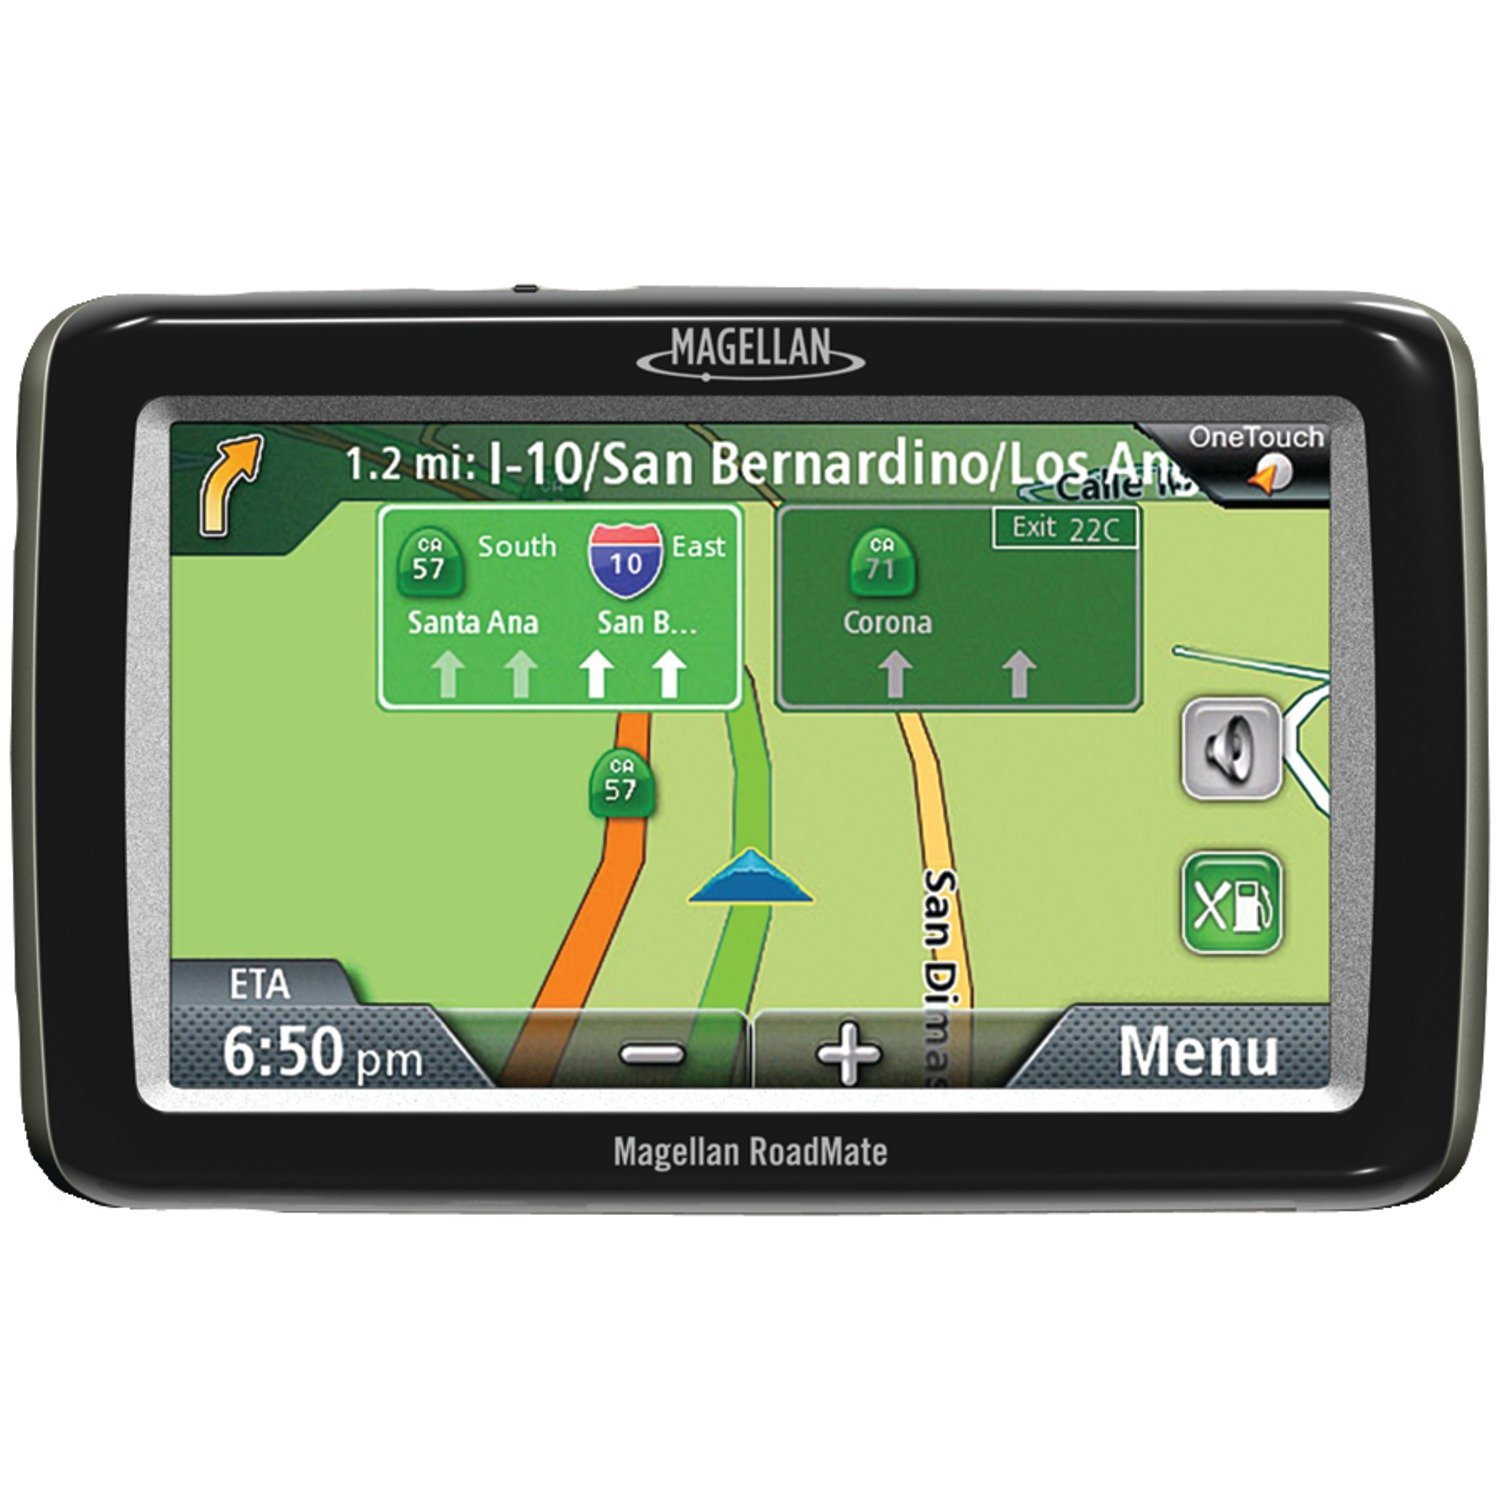 RM3030LM RB 4.7in Portable GPS